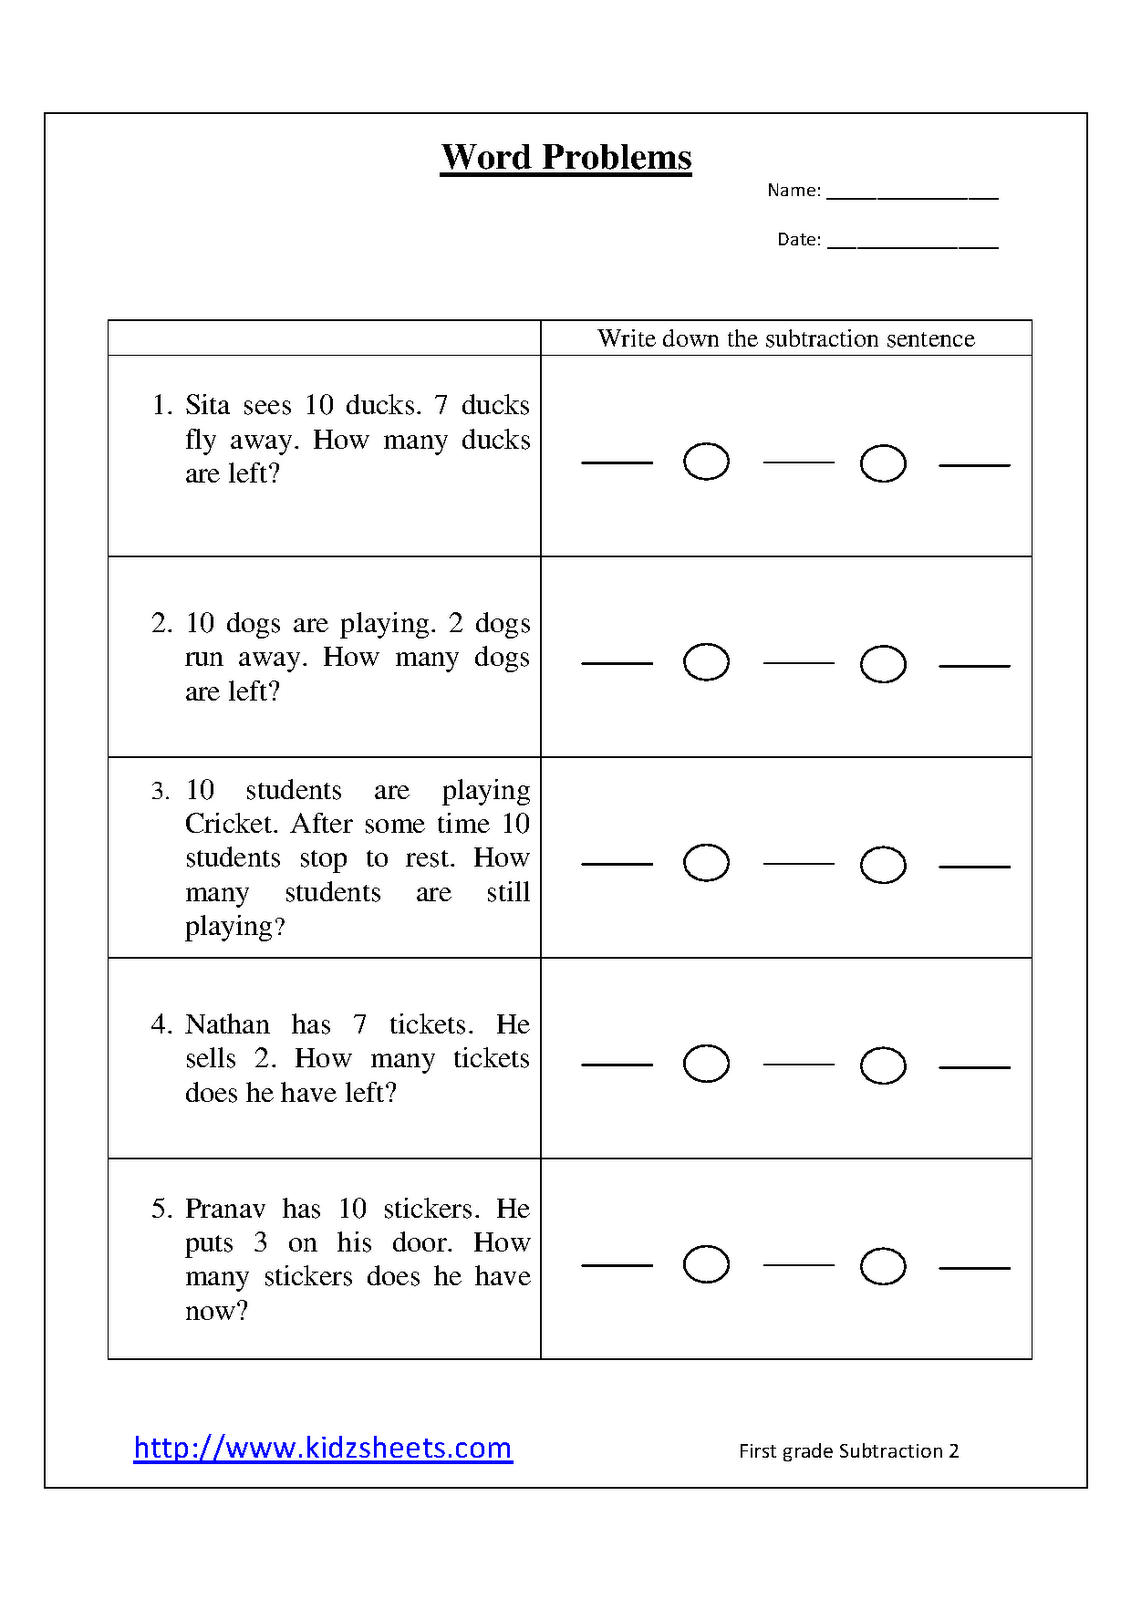 free-printable-math-worksheets-word-problems-first-grade-free-printable